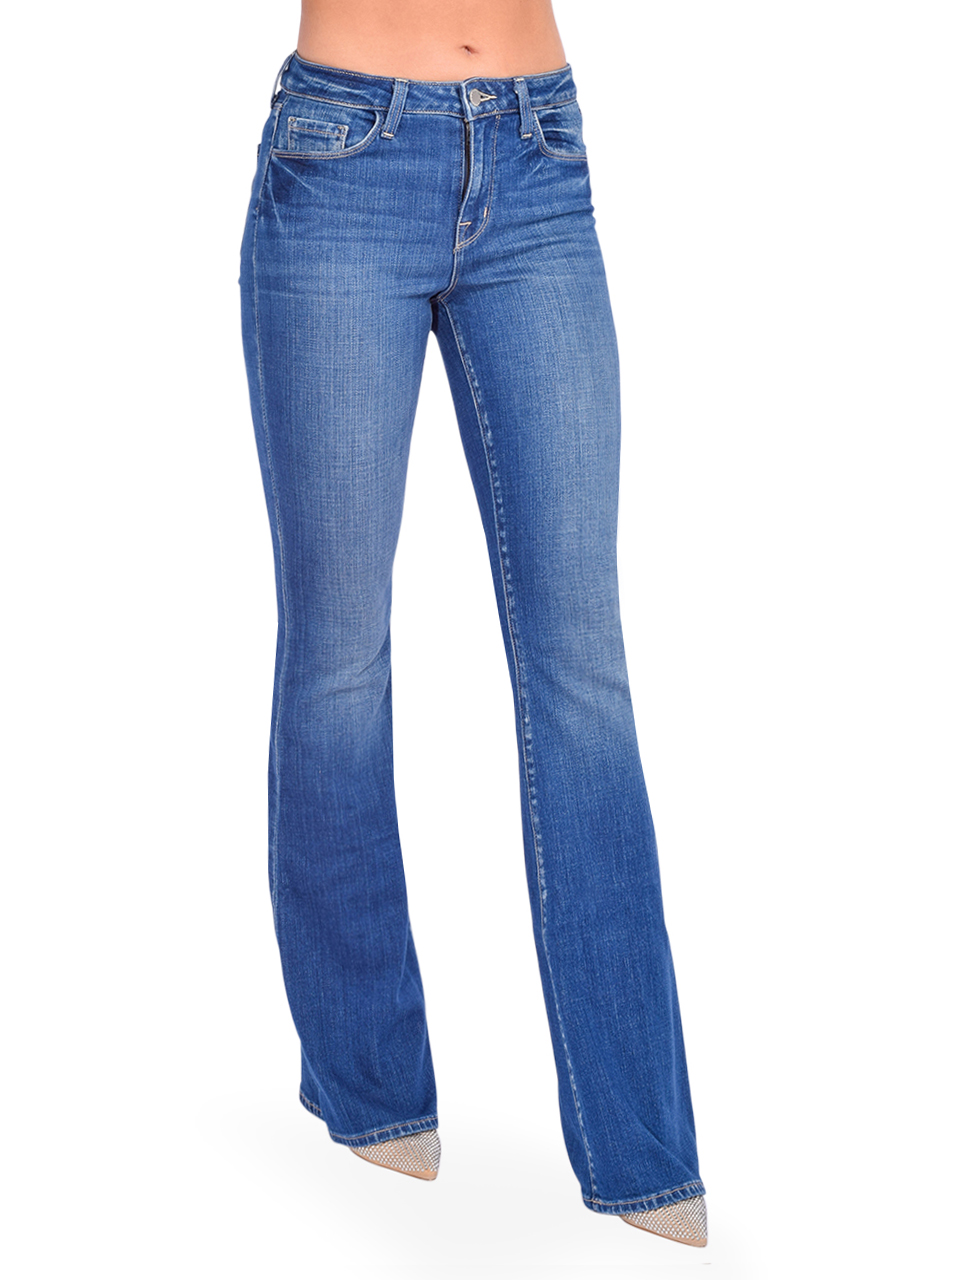 L'AGENCE Bell High Rise Flare Jeans in Hasting Side View 